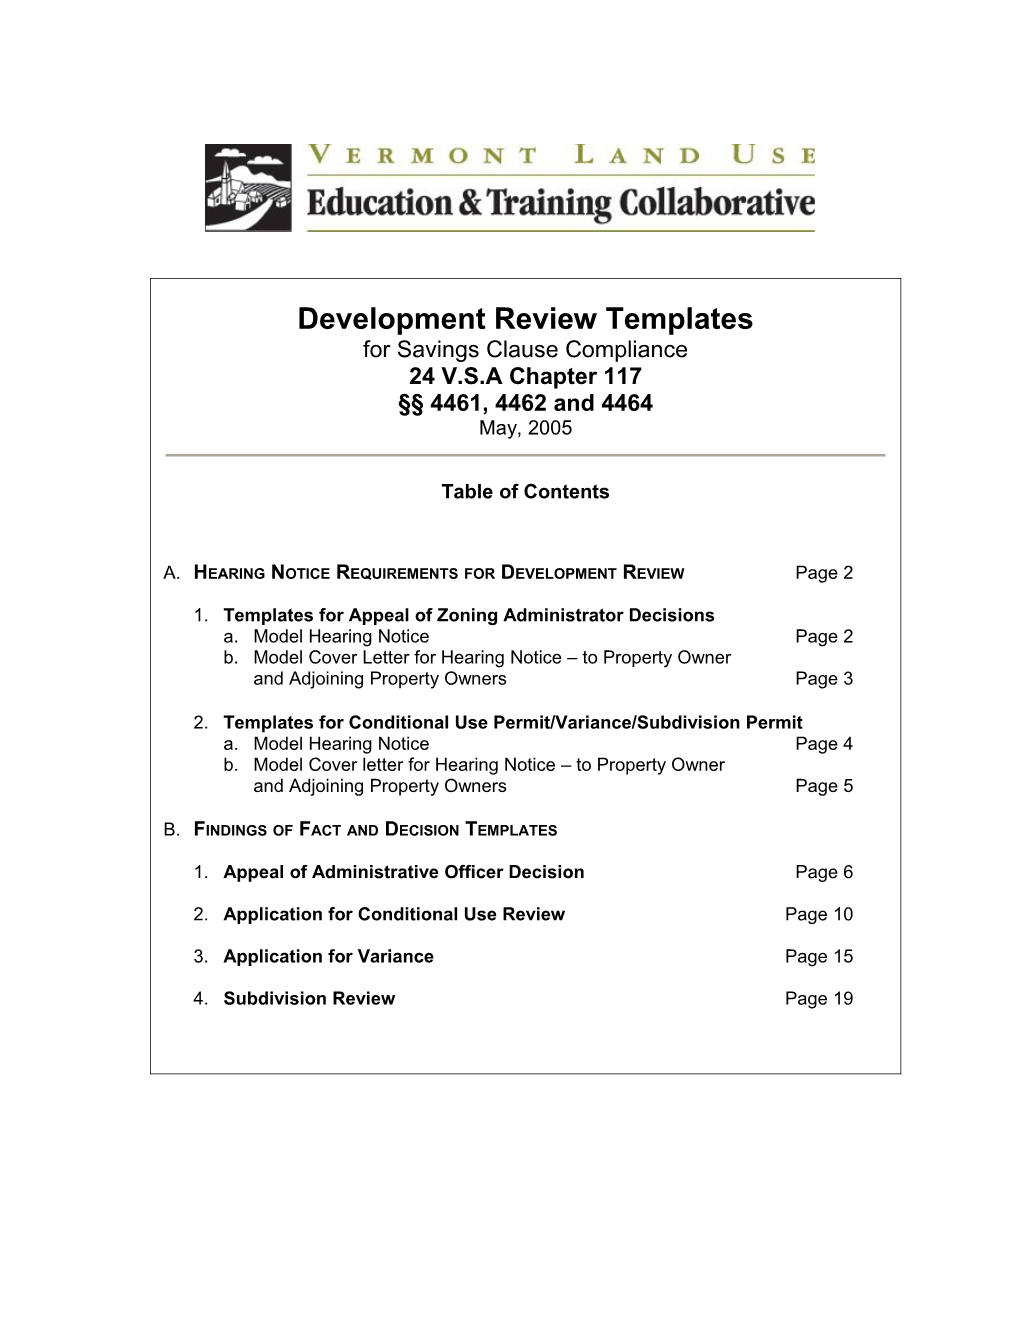 Development Review Templates Hearing Notice Requirements